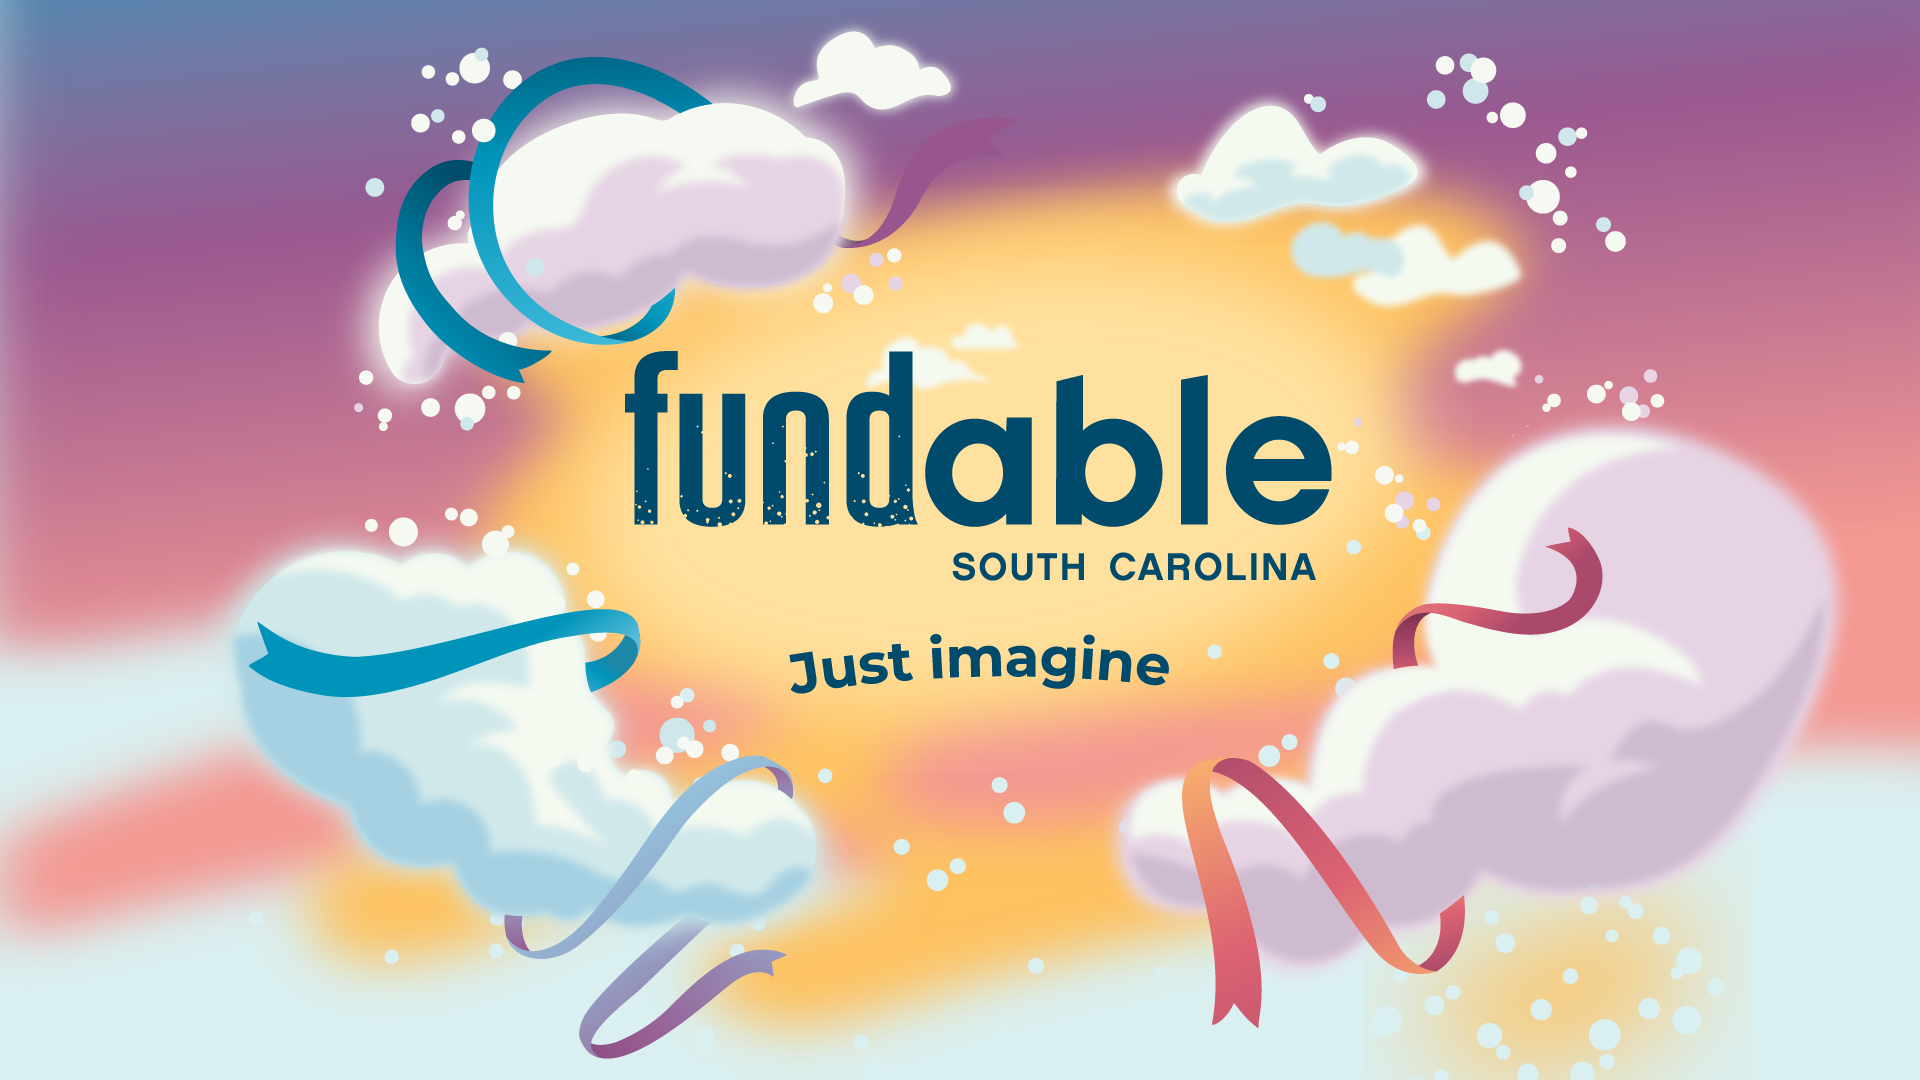 Graphic with yellow, orange, gold, pink, and purple tones blurred together in a dreamlike effect in the background. Centered is a logo that reads, 'Fundable, Just Imagine.' The text is surrounded by fluffy clouds and swirling ribbons in blues, purples, and pinks.